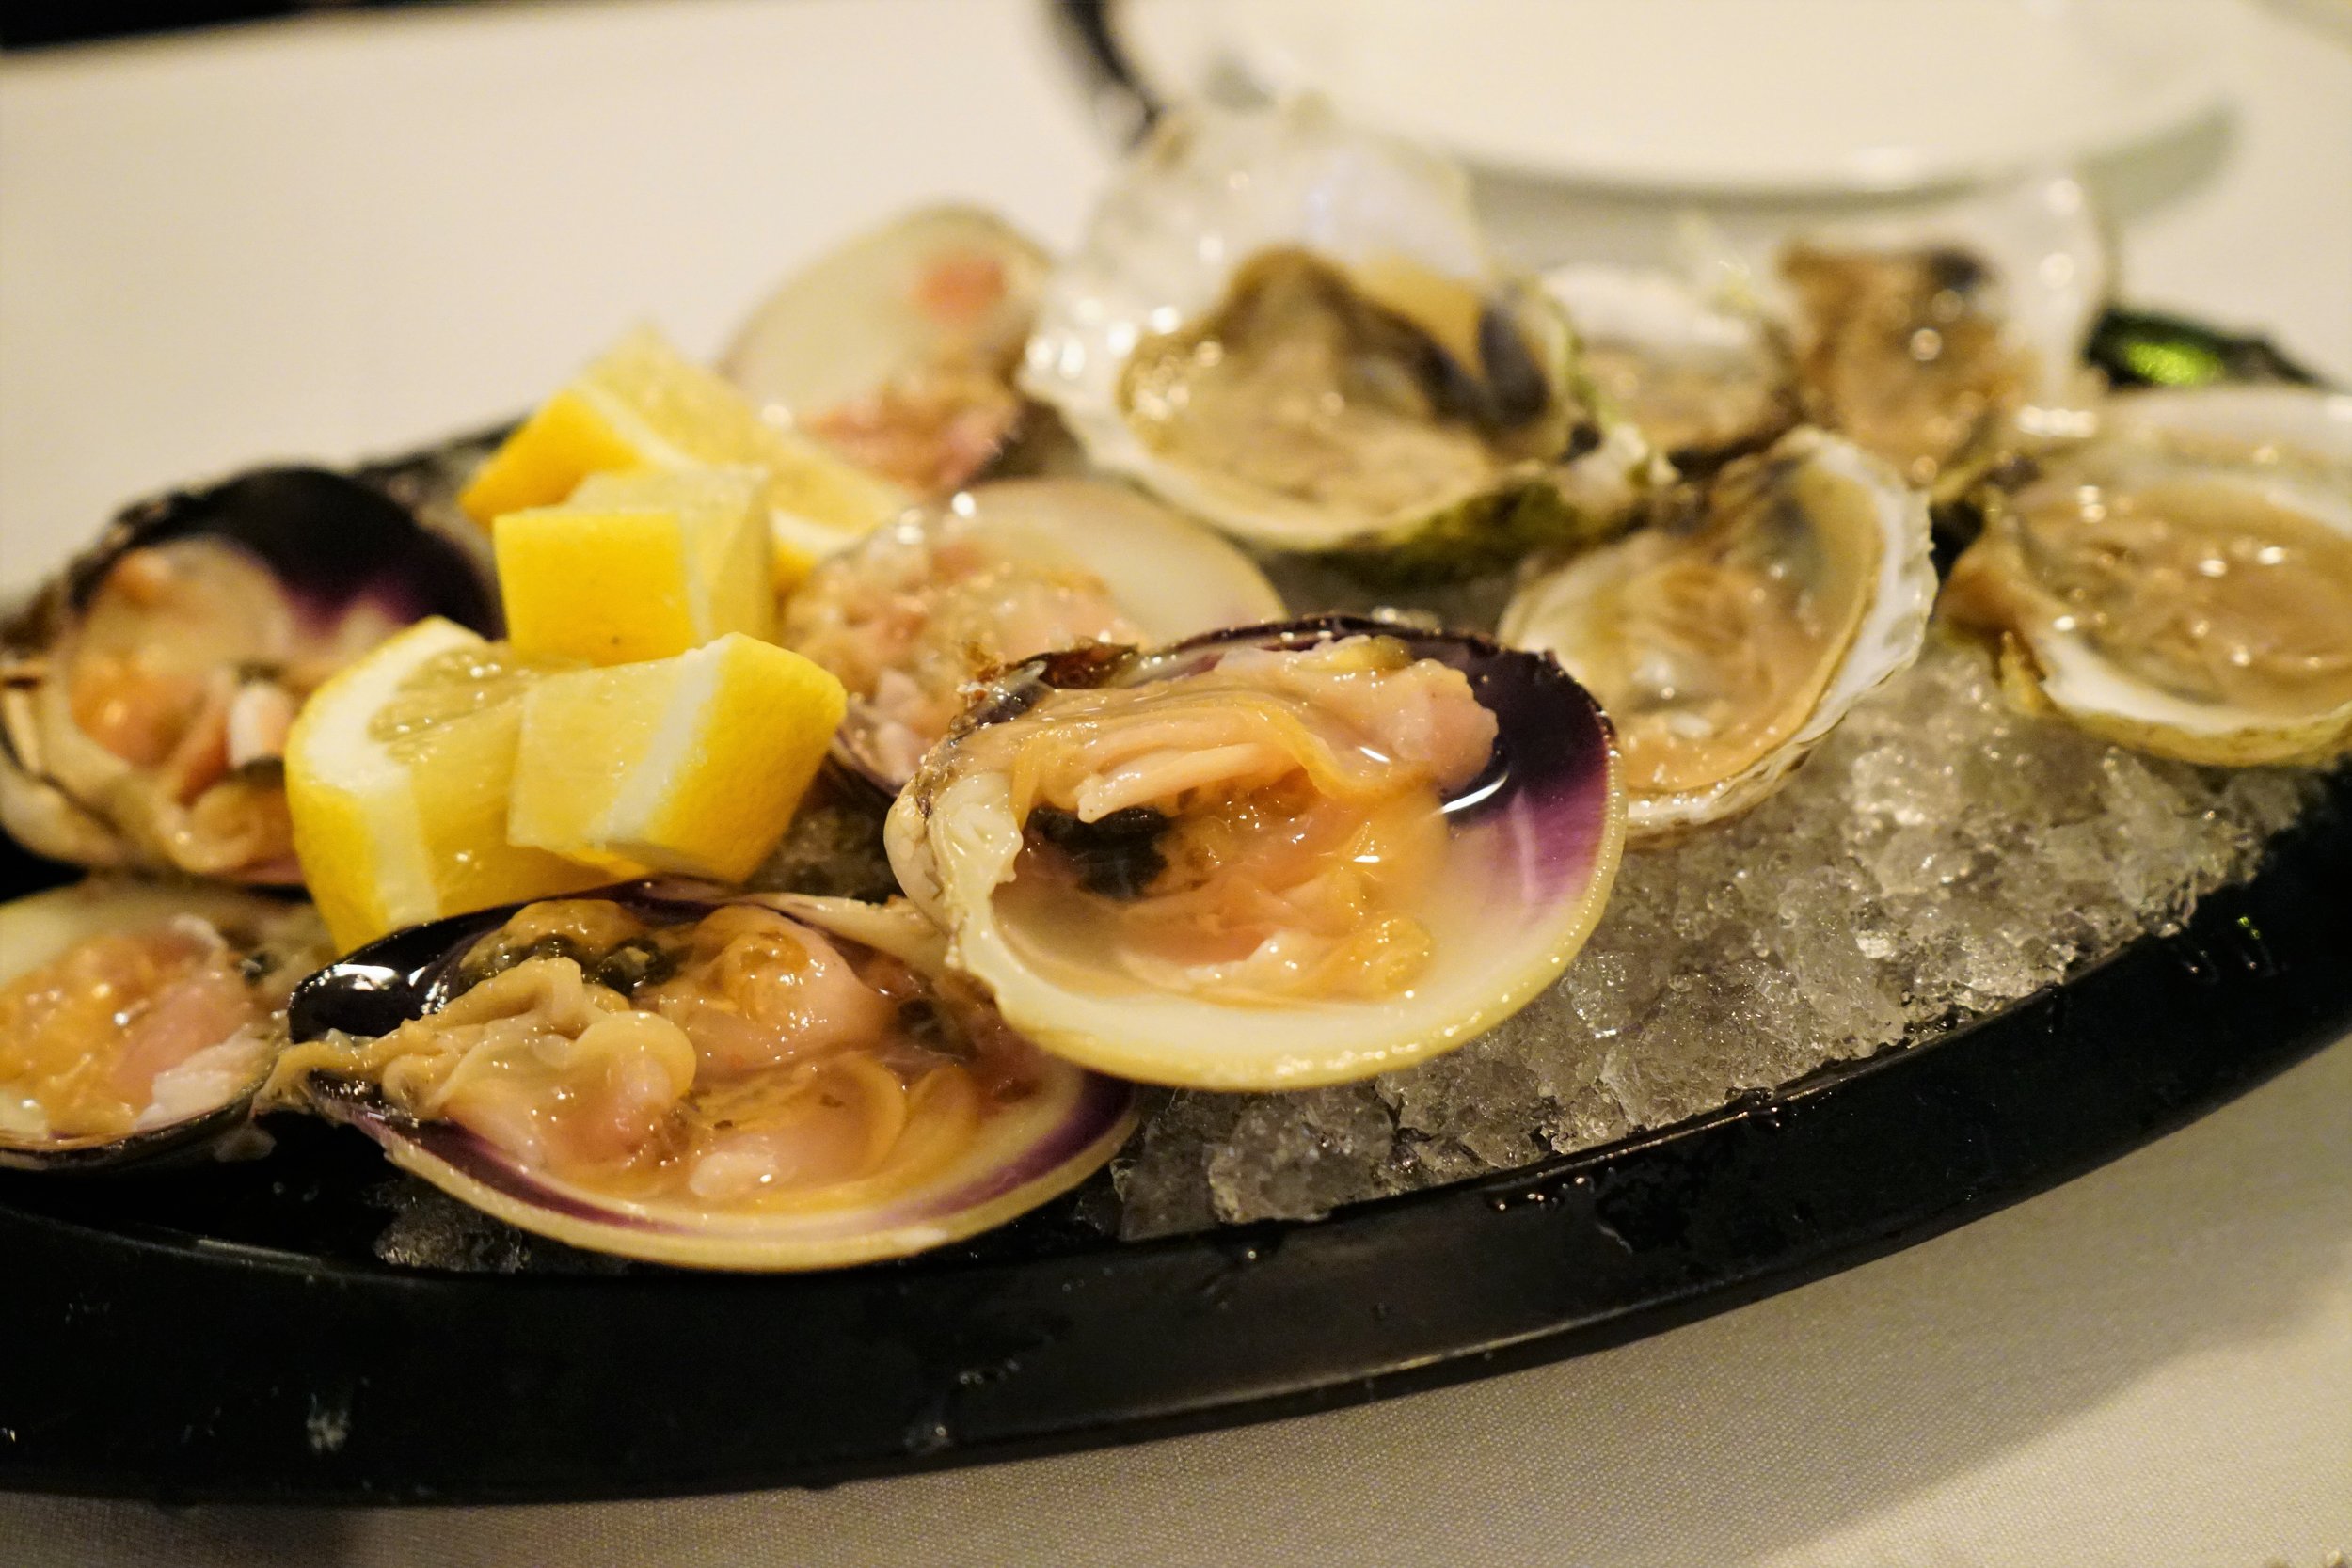 Oysters and Little Neck Clams at Marliave in Boston